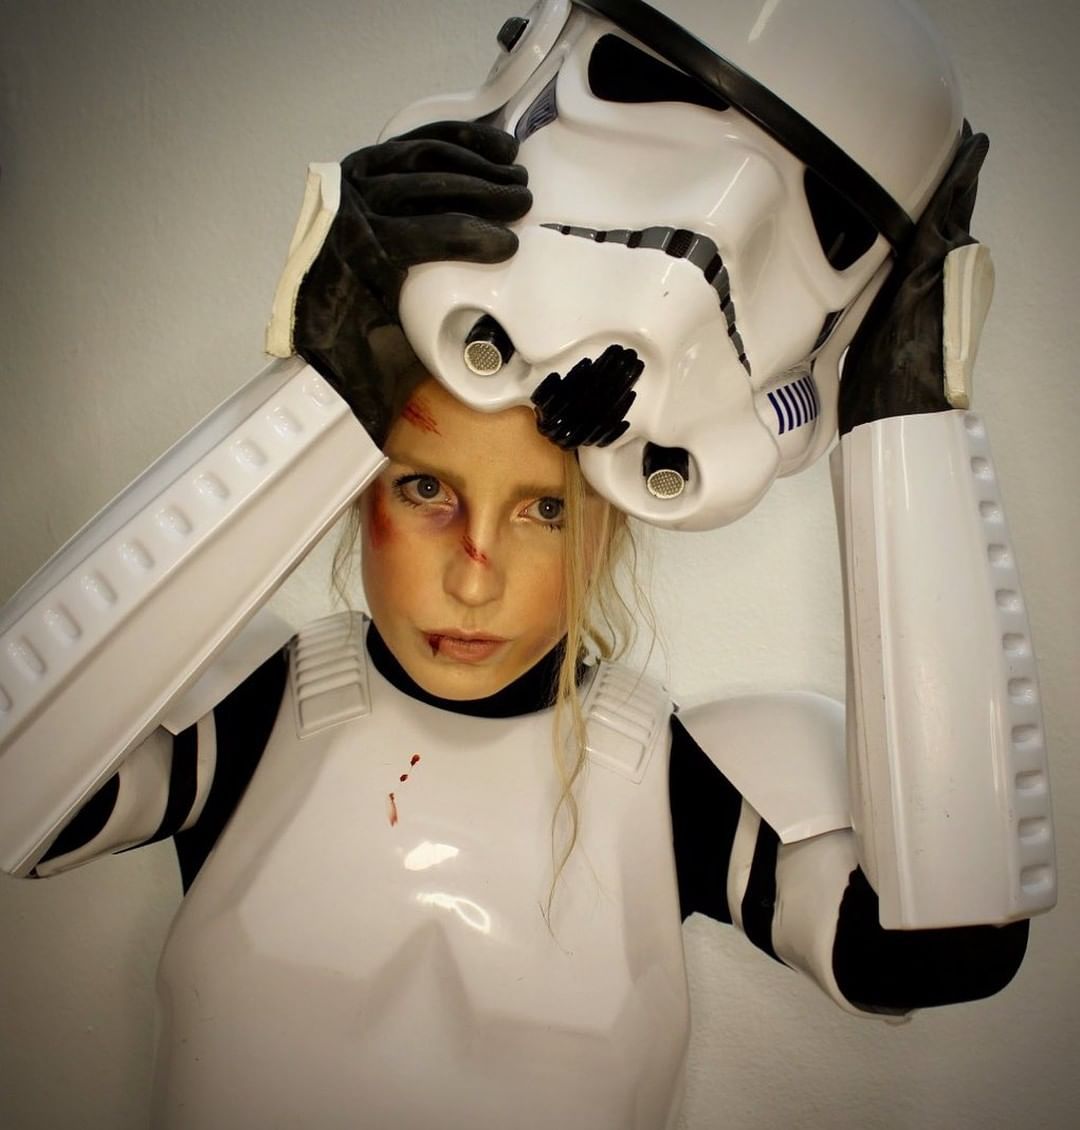 -Only Imperial Stormtroopers are so precise-
#stormtrooper #starwars #cosplay #costume #stormtroopercostume #stormtroopercosplay #starwarscosplay #starwarscostume #femtrooper #stormtroopergirl #starwarsgirl #womenofstarwars #imperialstormtrooper...